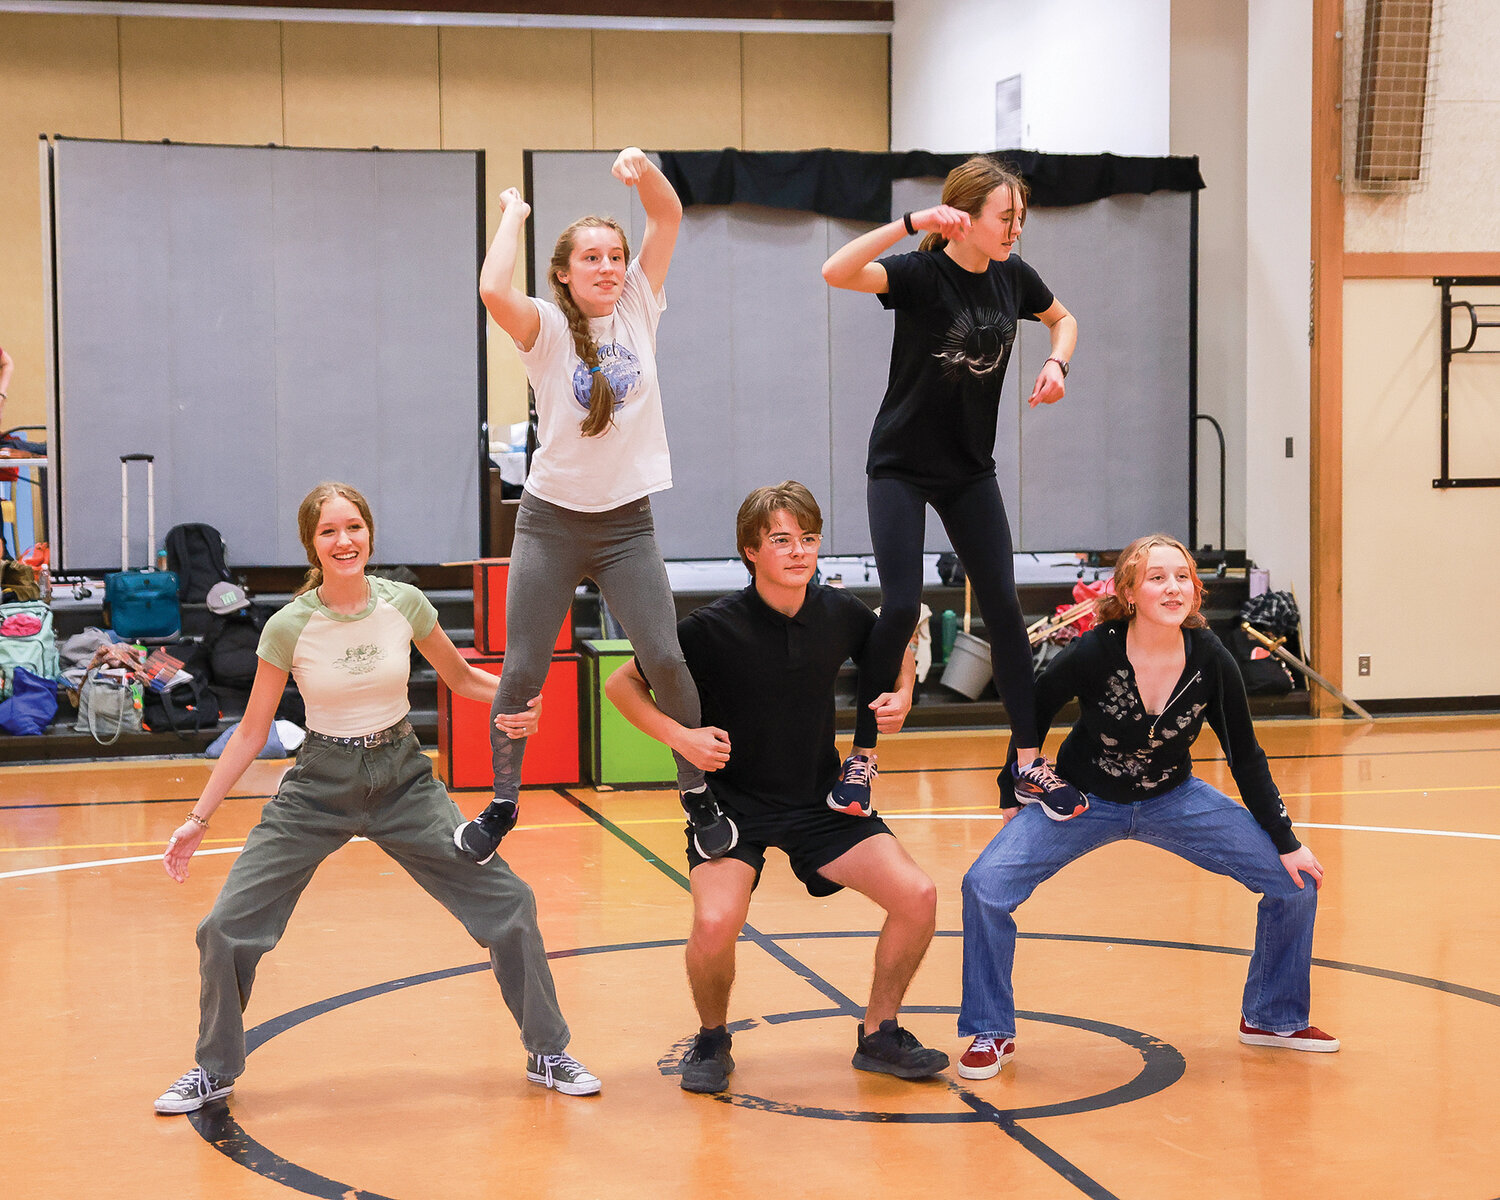 Students in River Homelink’s Theater Program rehearse for their upcoming production of Disney’s “Aladdin.” From left to right are Luna Bracke, Danica Wyenberg, Jackson Carter, Jordan O’Bryan and Magdelana Long.